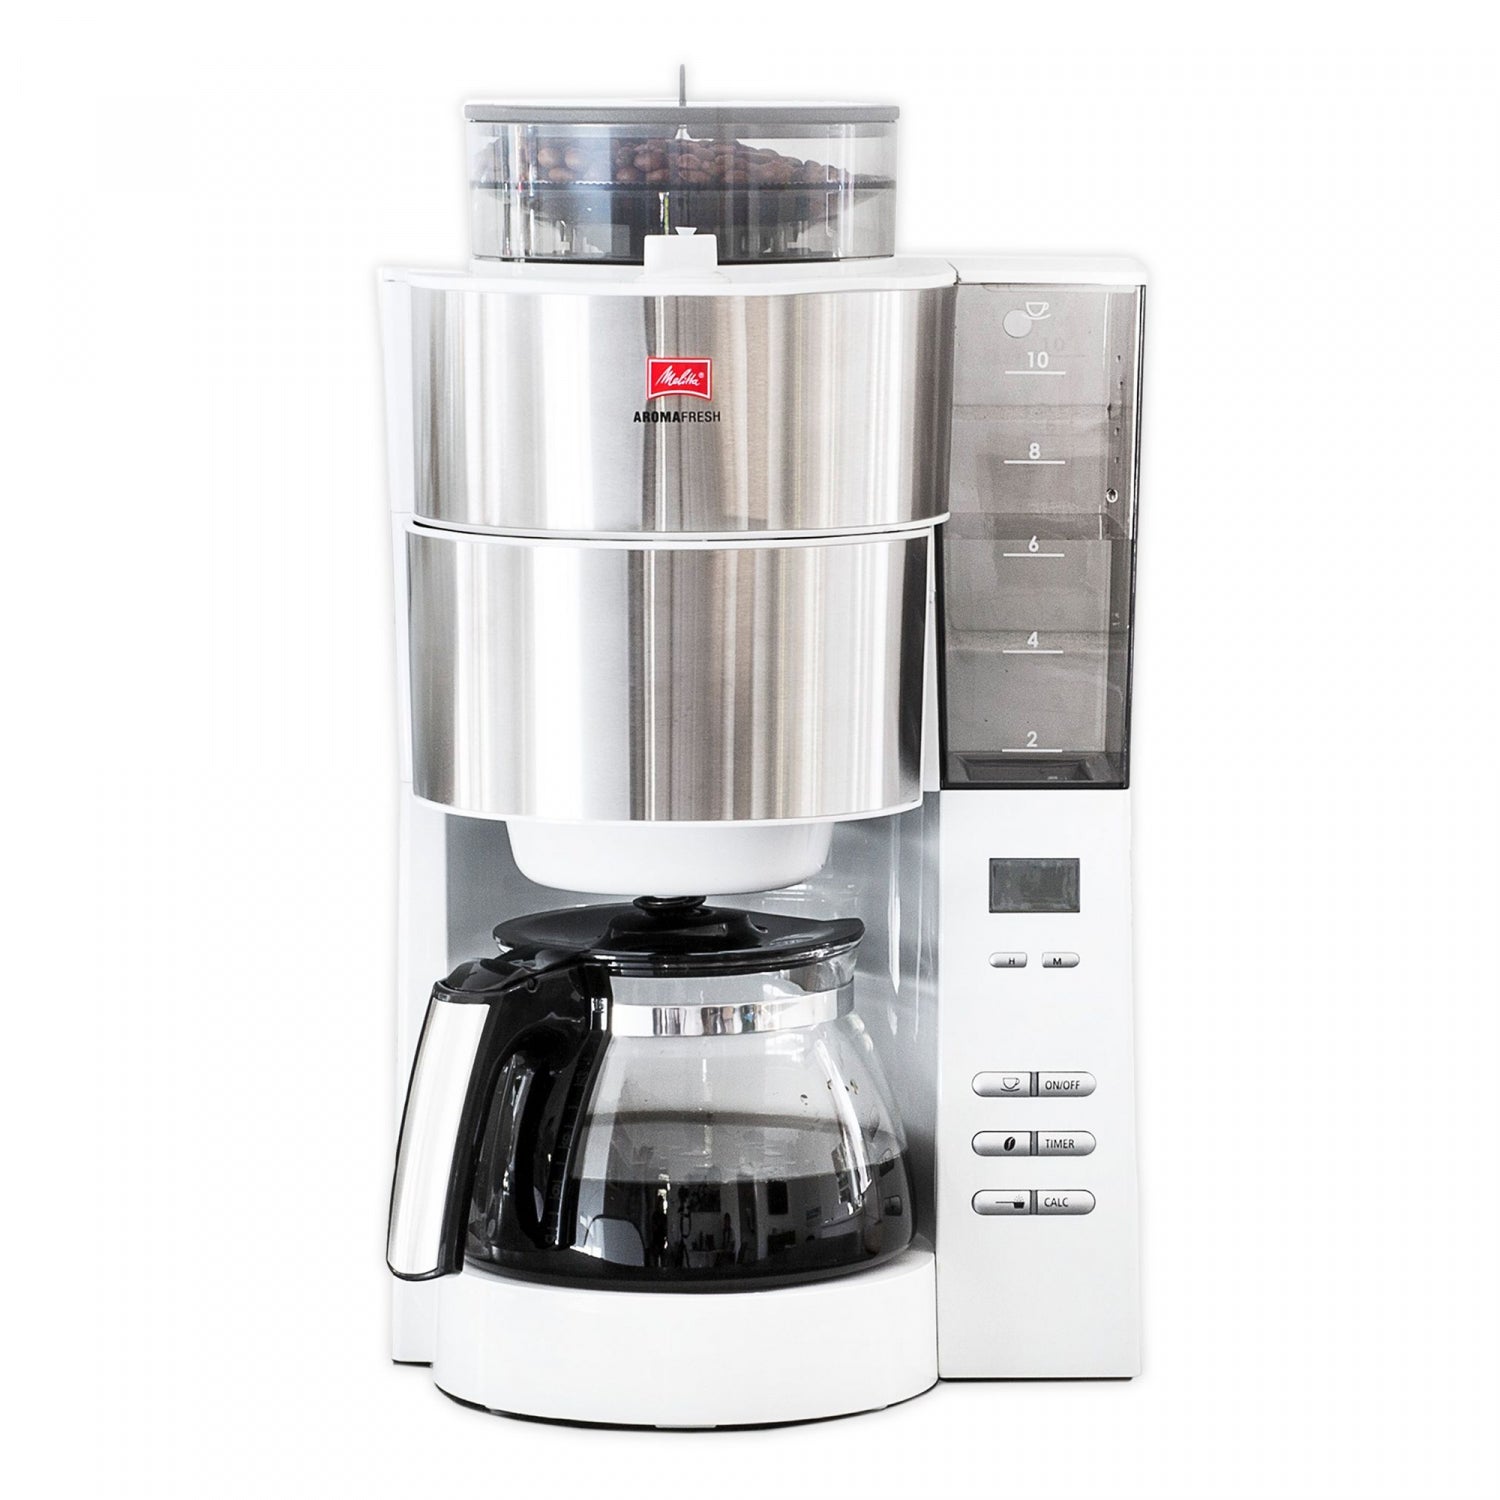 Melitta Aroma Fresh Grind and Brew 10Cup Coffee Maker in